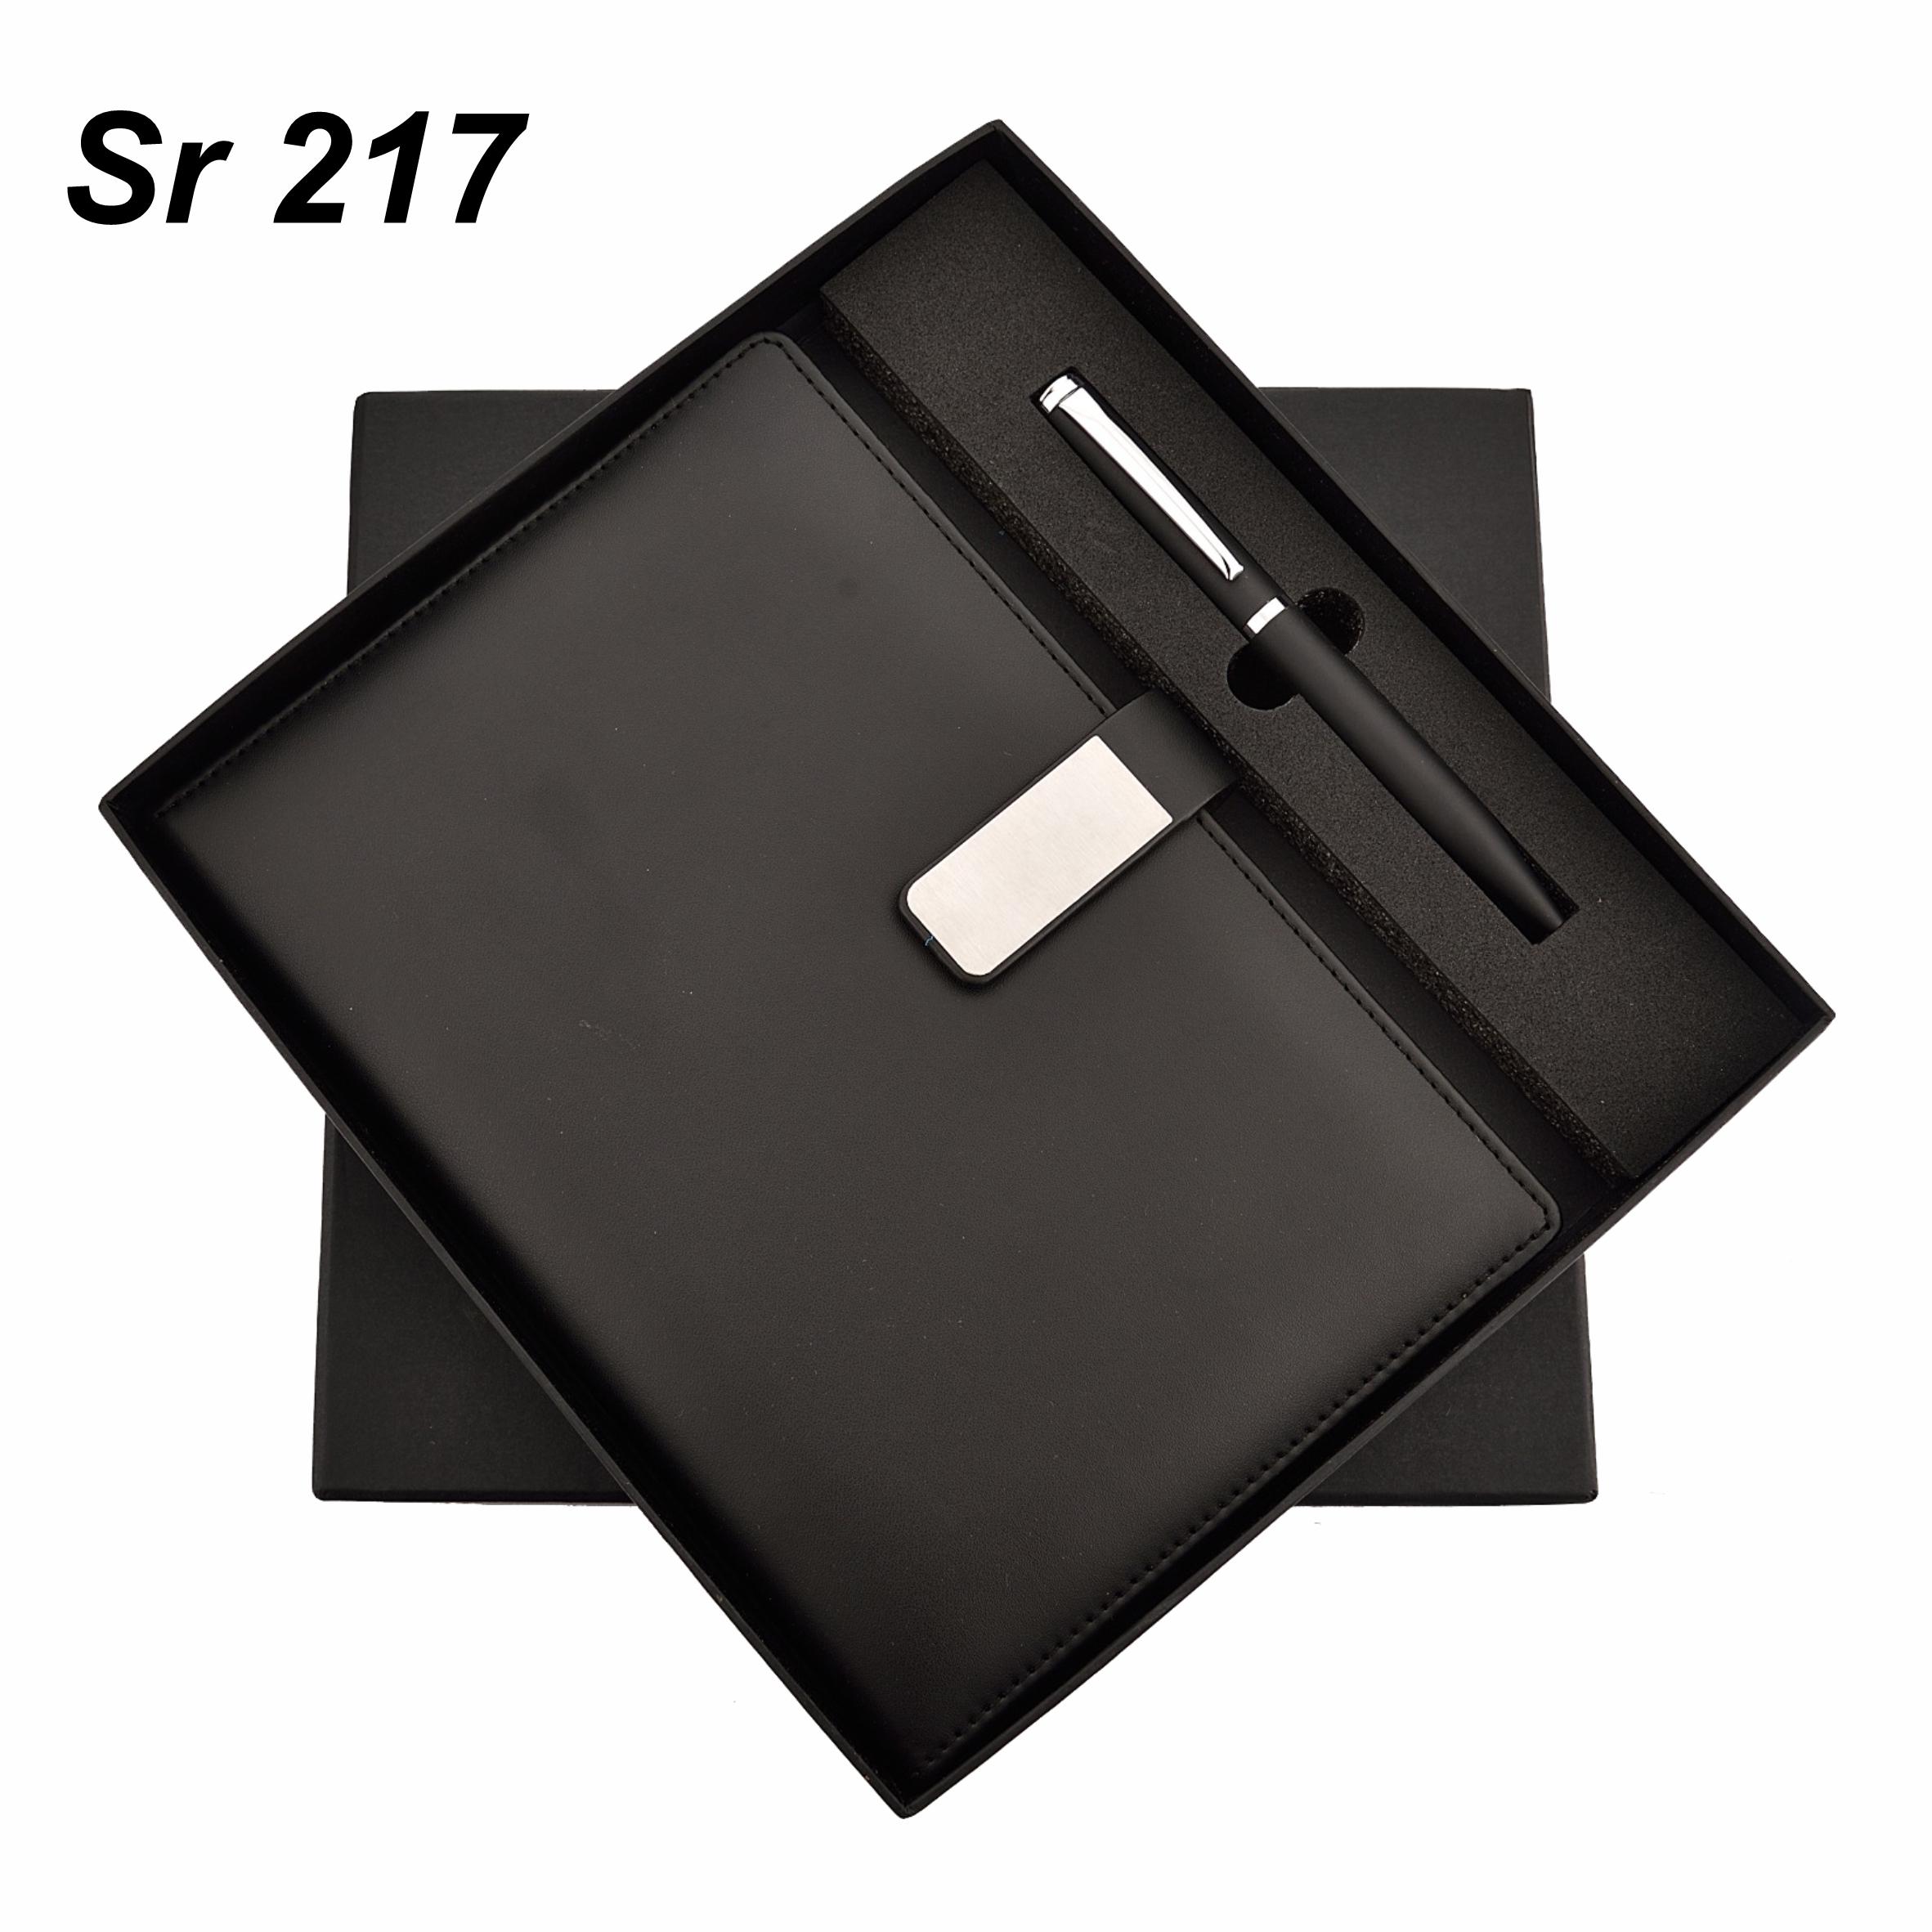 Shop Black Themed Pen Gift Sets - Perfect For Any Occasion